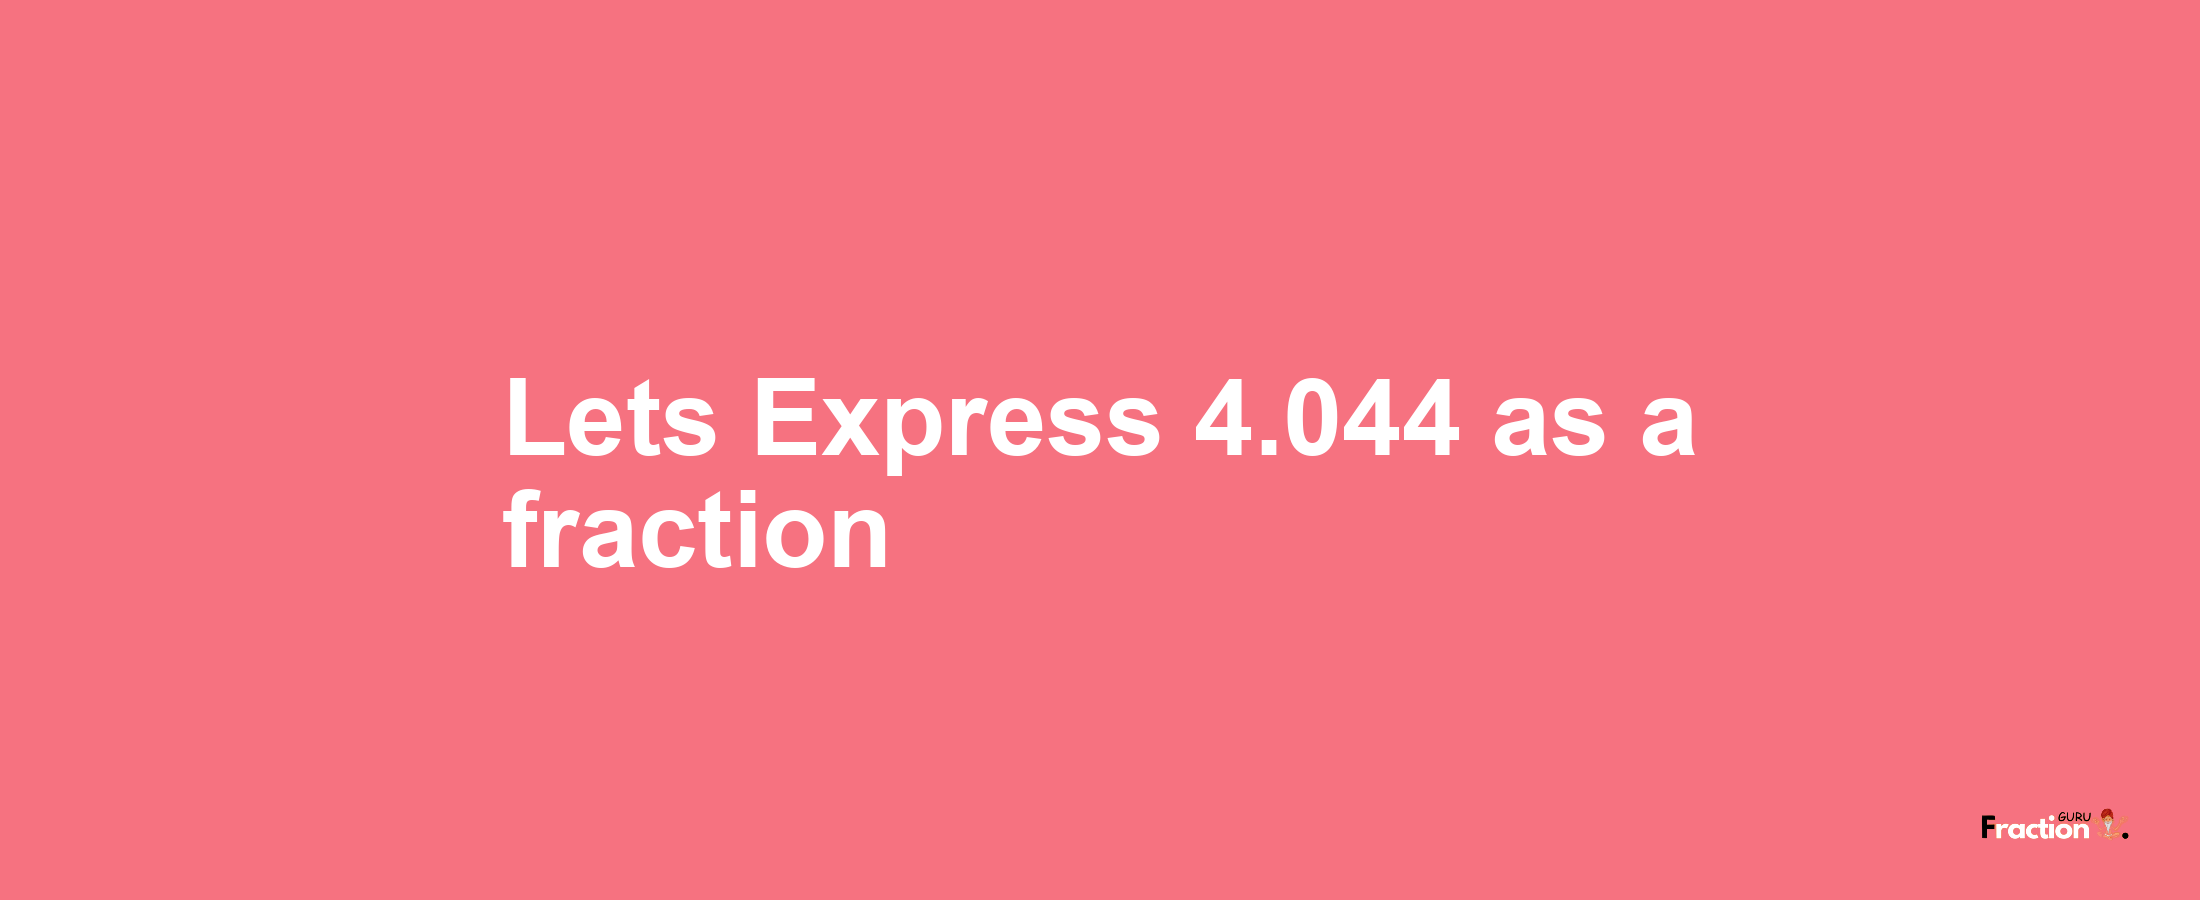 Lets Express 4.044 as afraction